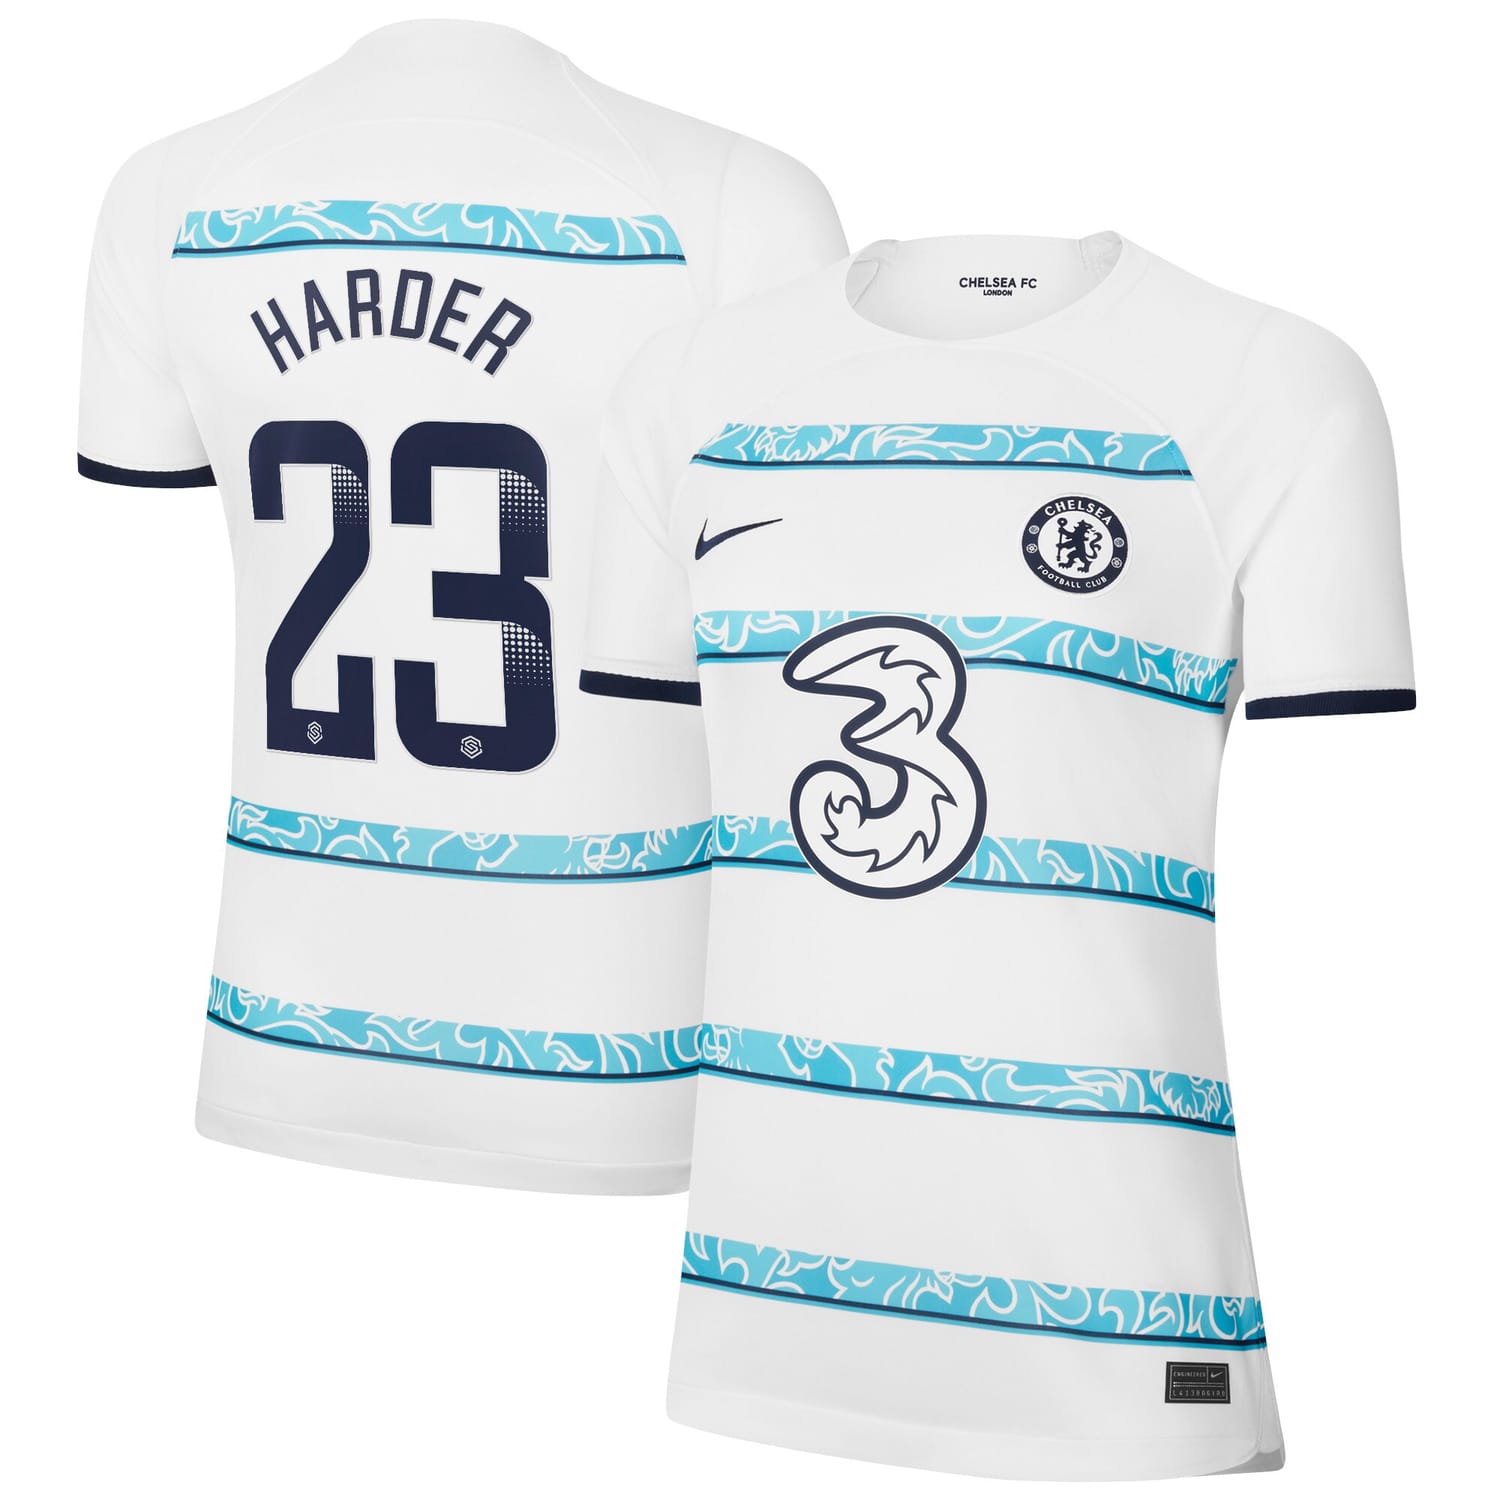 Premier League Away WSL Jersey Shirt 2022-23 player Pernille Harder 23 printing for Women